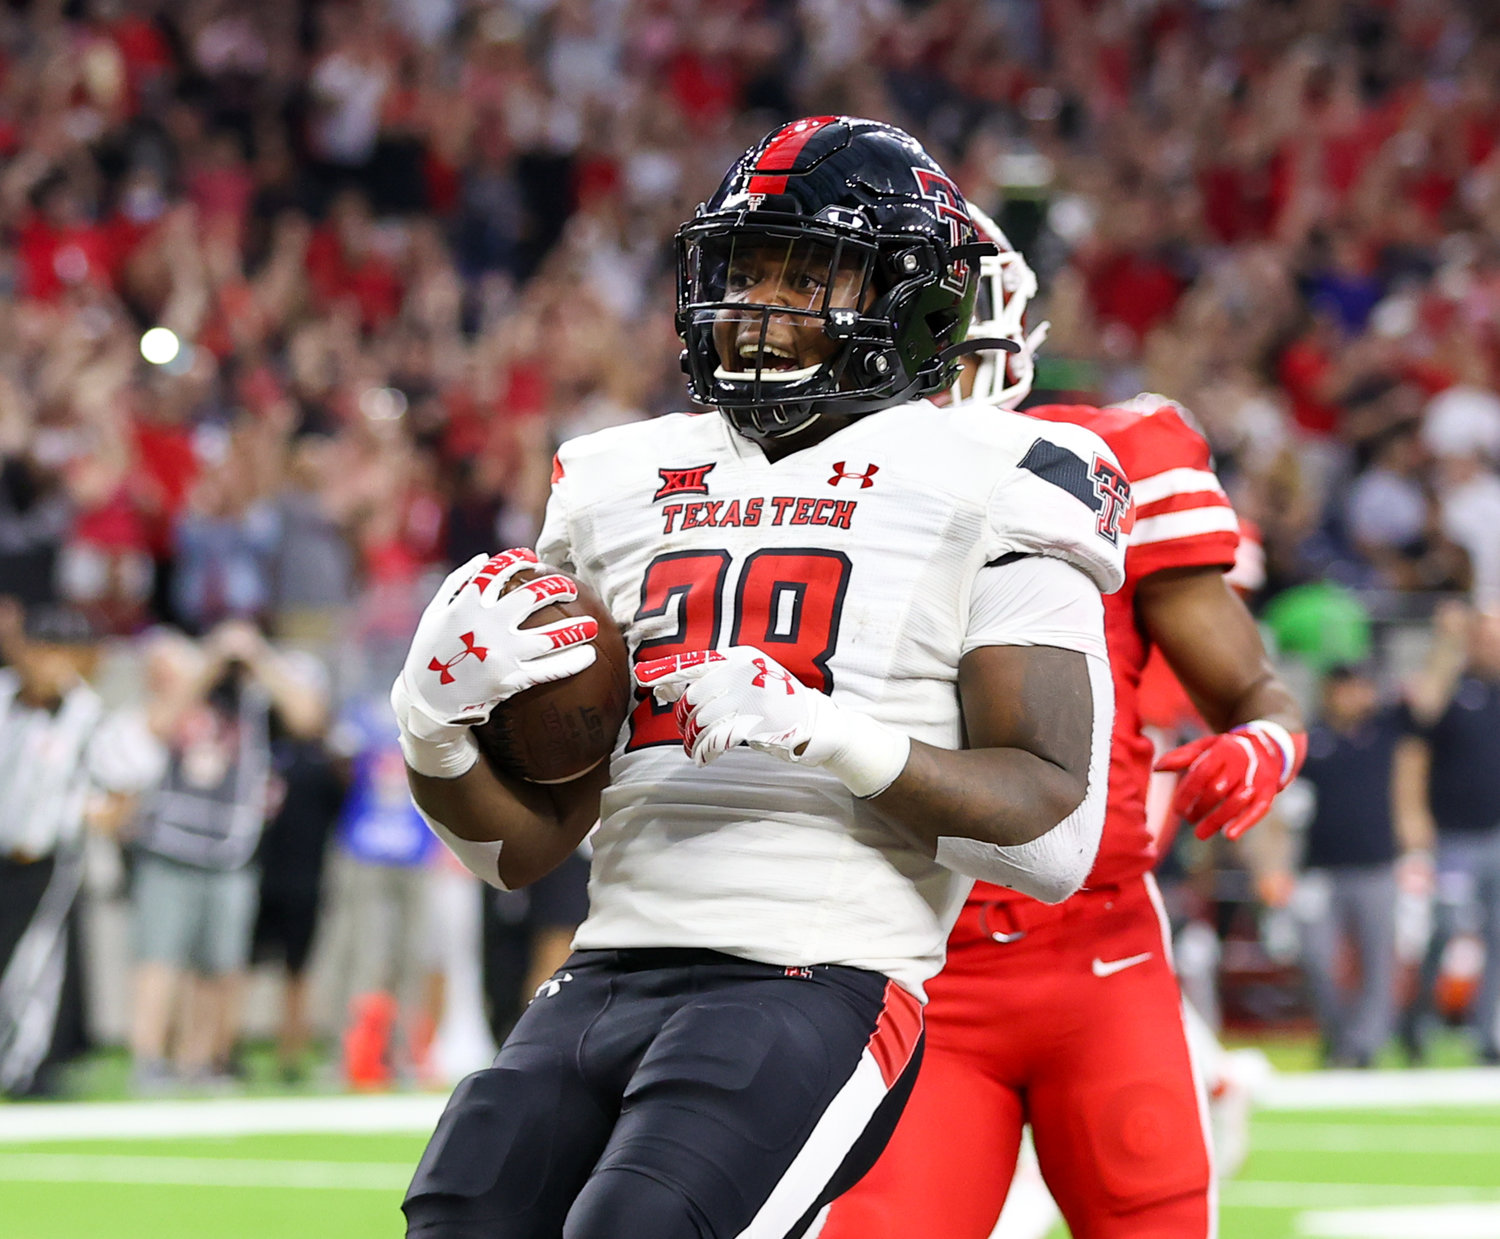 Texas Tech Red Raiders running back Tahj Brooks (28) carries the ball into the end zone on a 41-yard touchdown run during an NCAA football game between Houston and Texas Tech on September 4, 2021 in Houston, Texas.